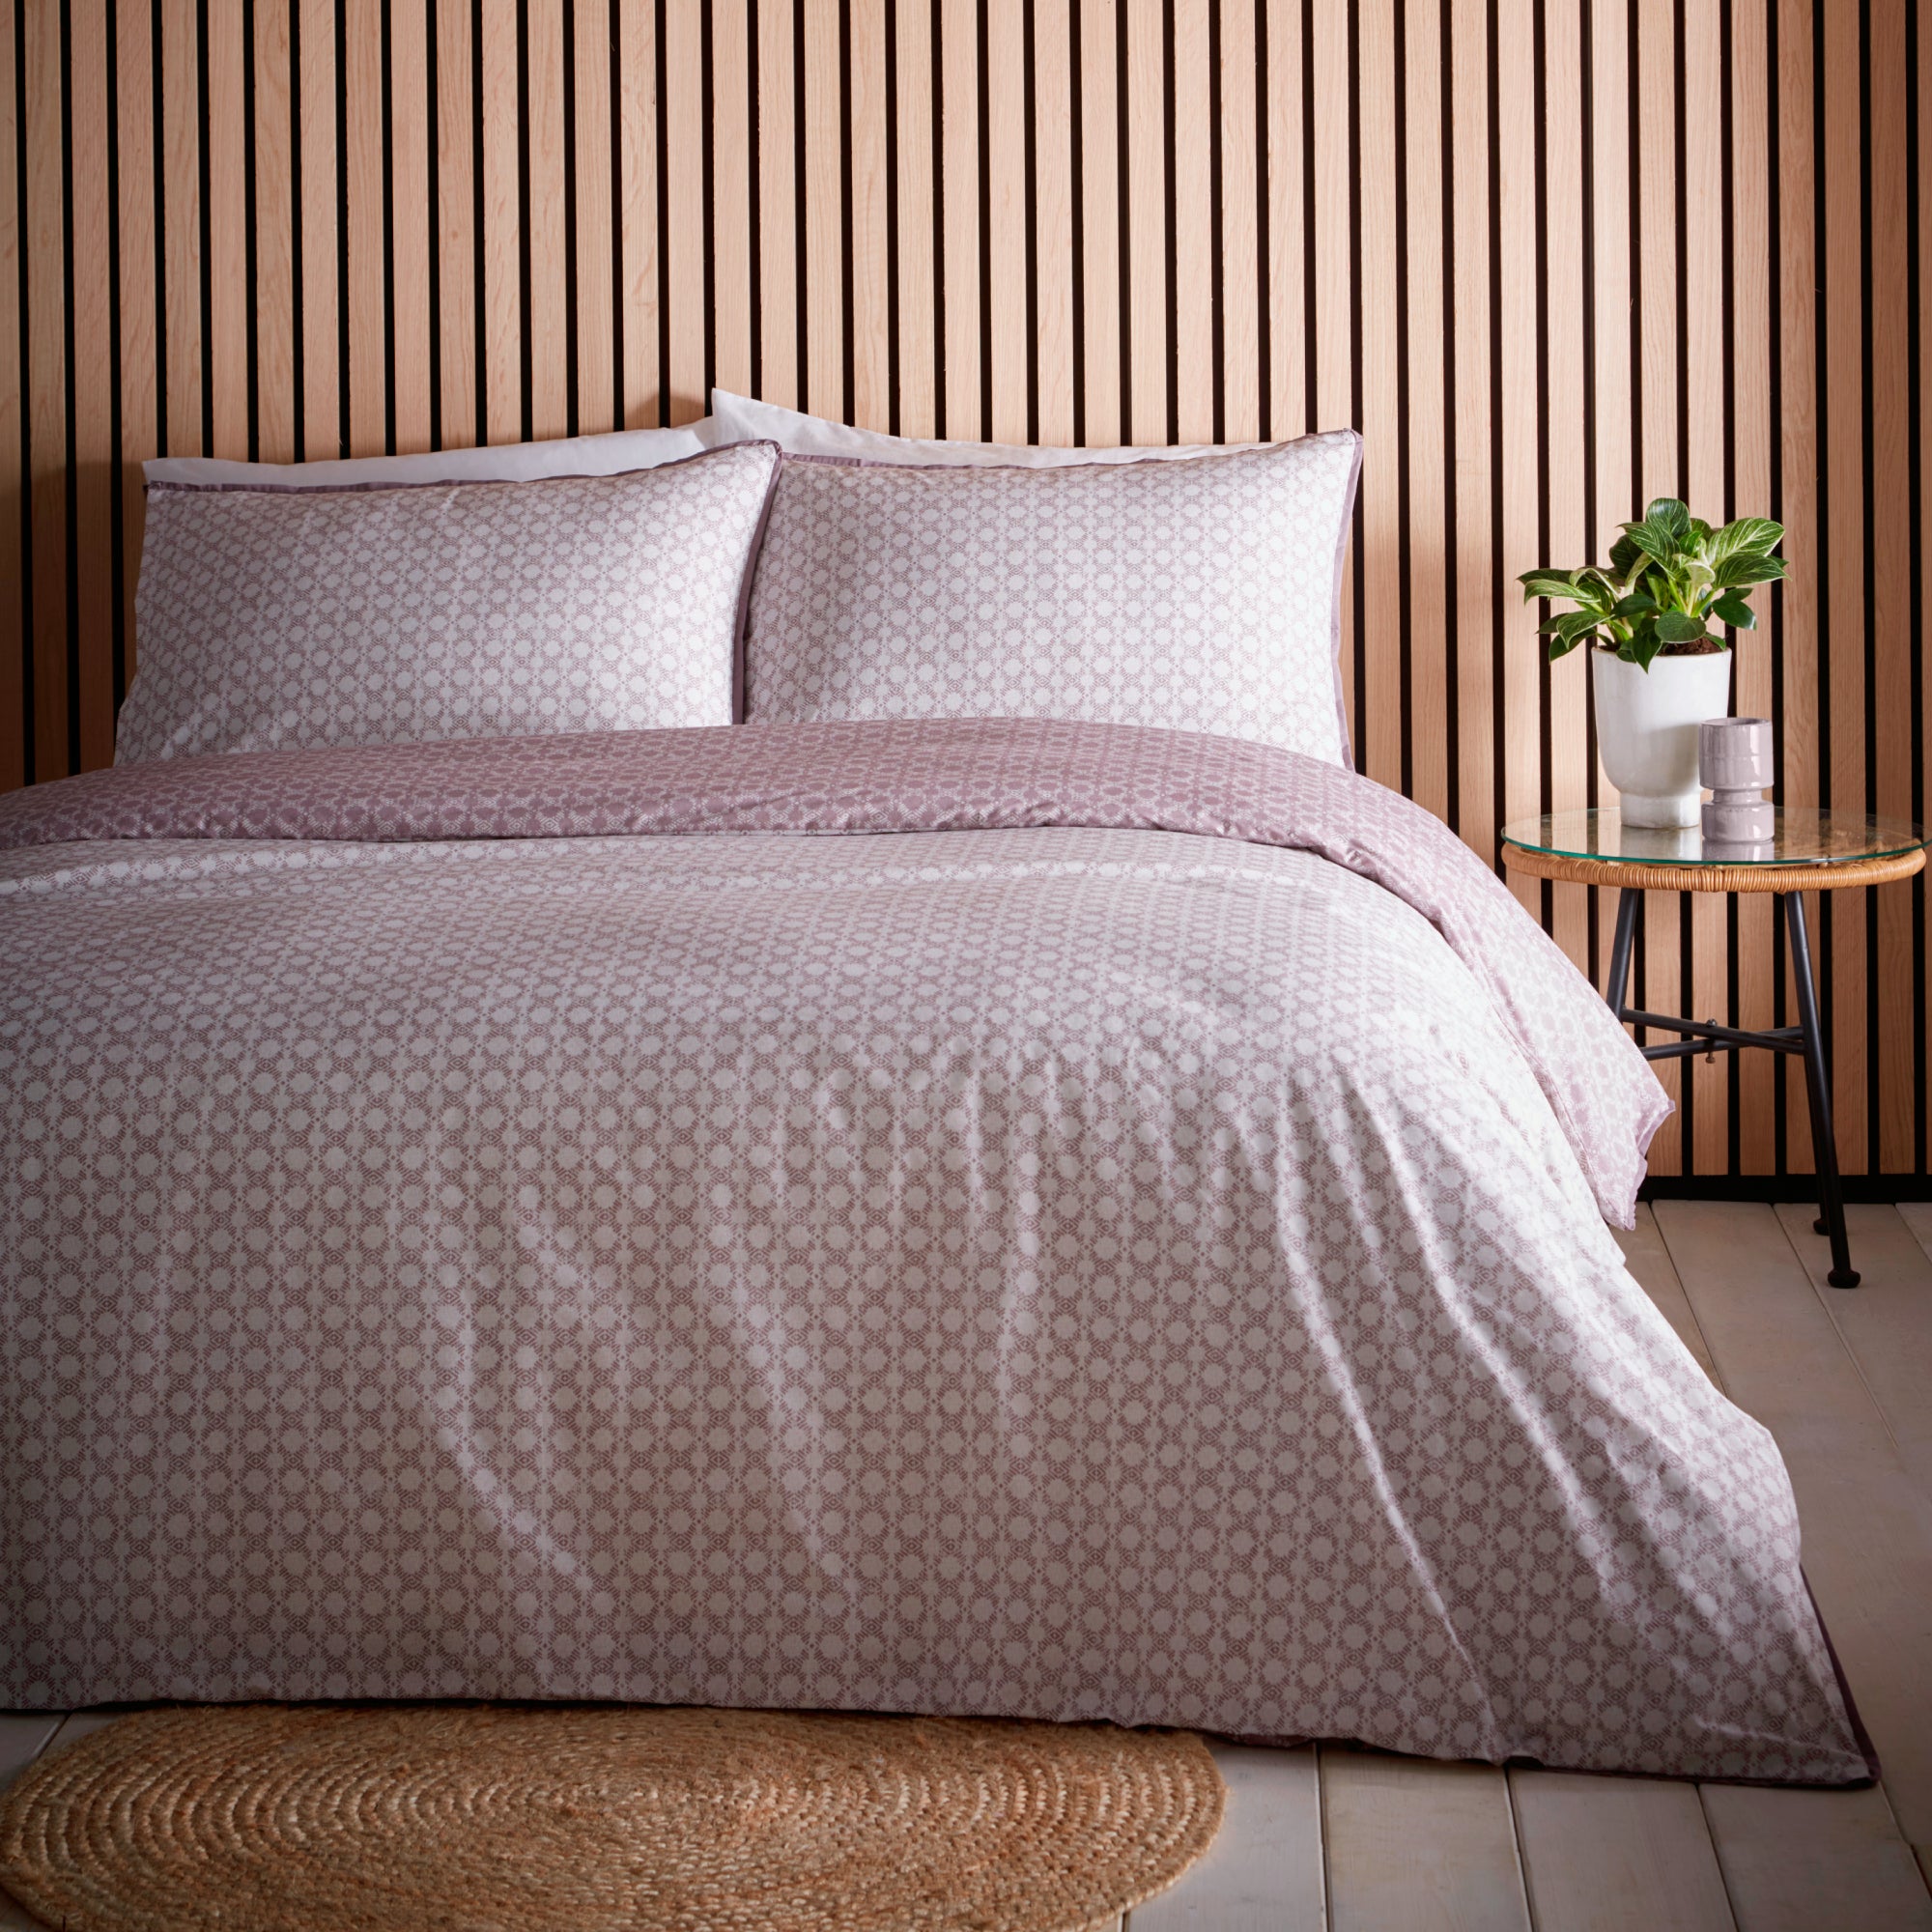 Duvet Cover Set Orson by Appletree Loft in Heather